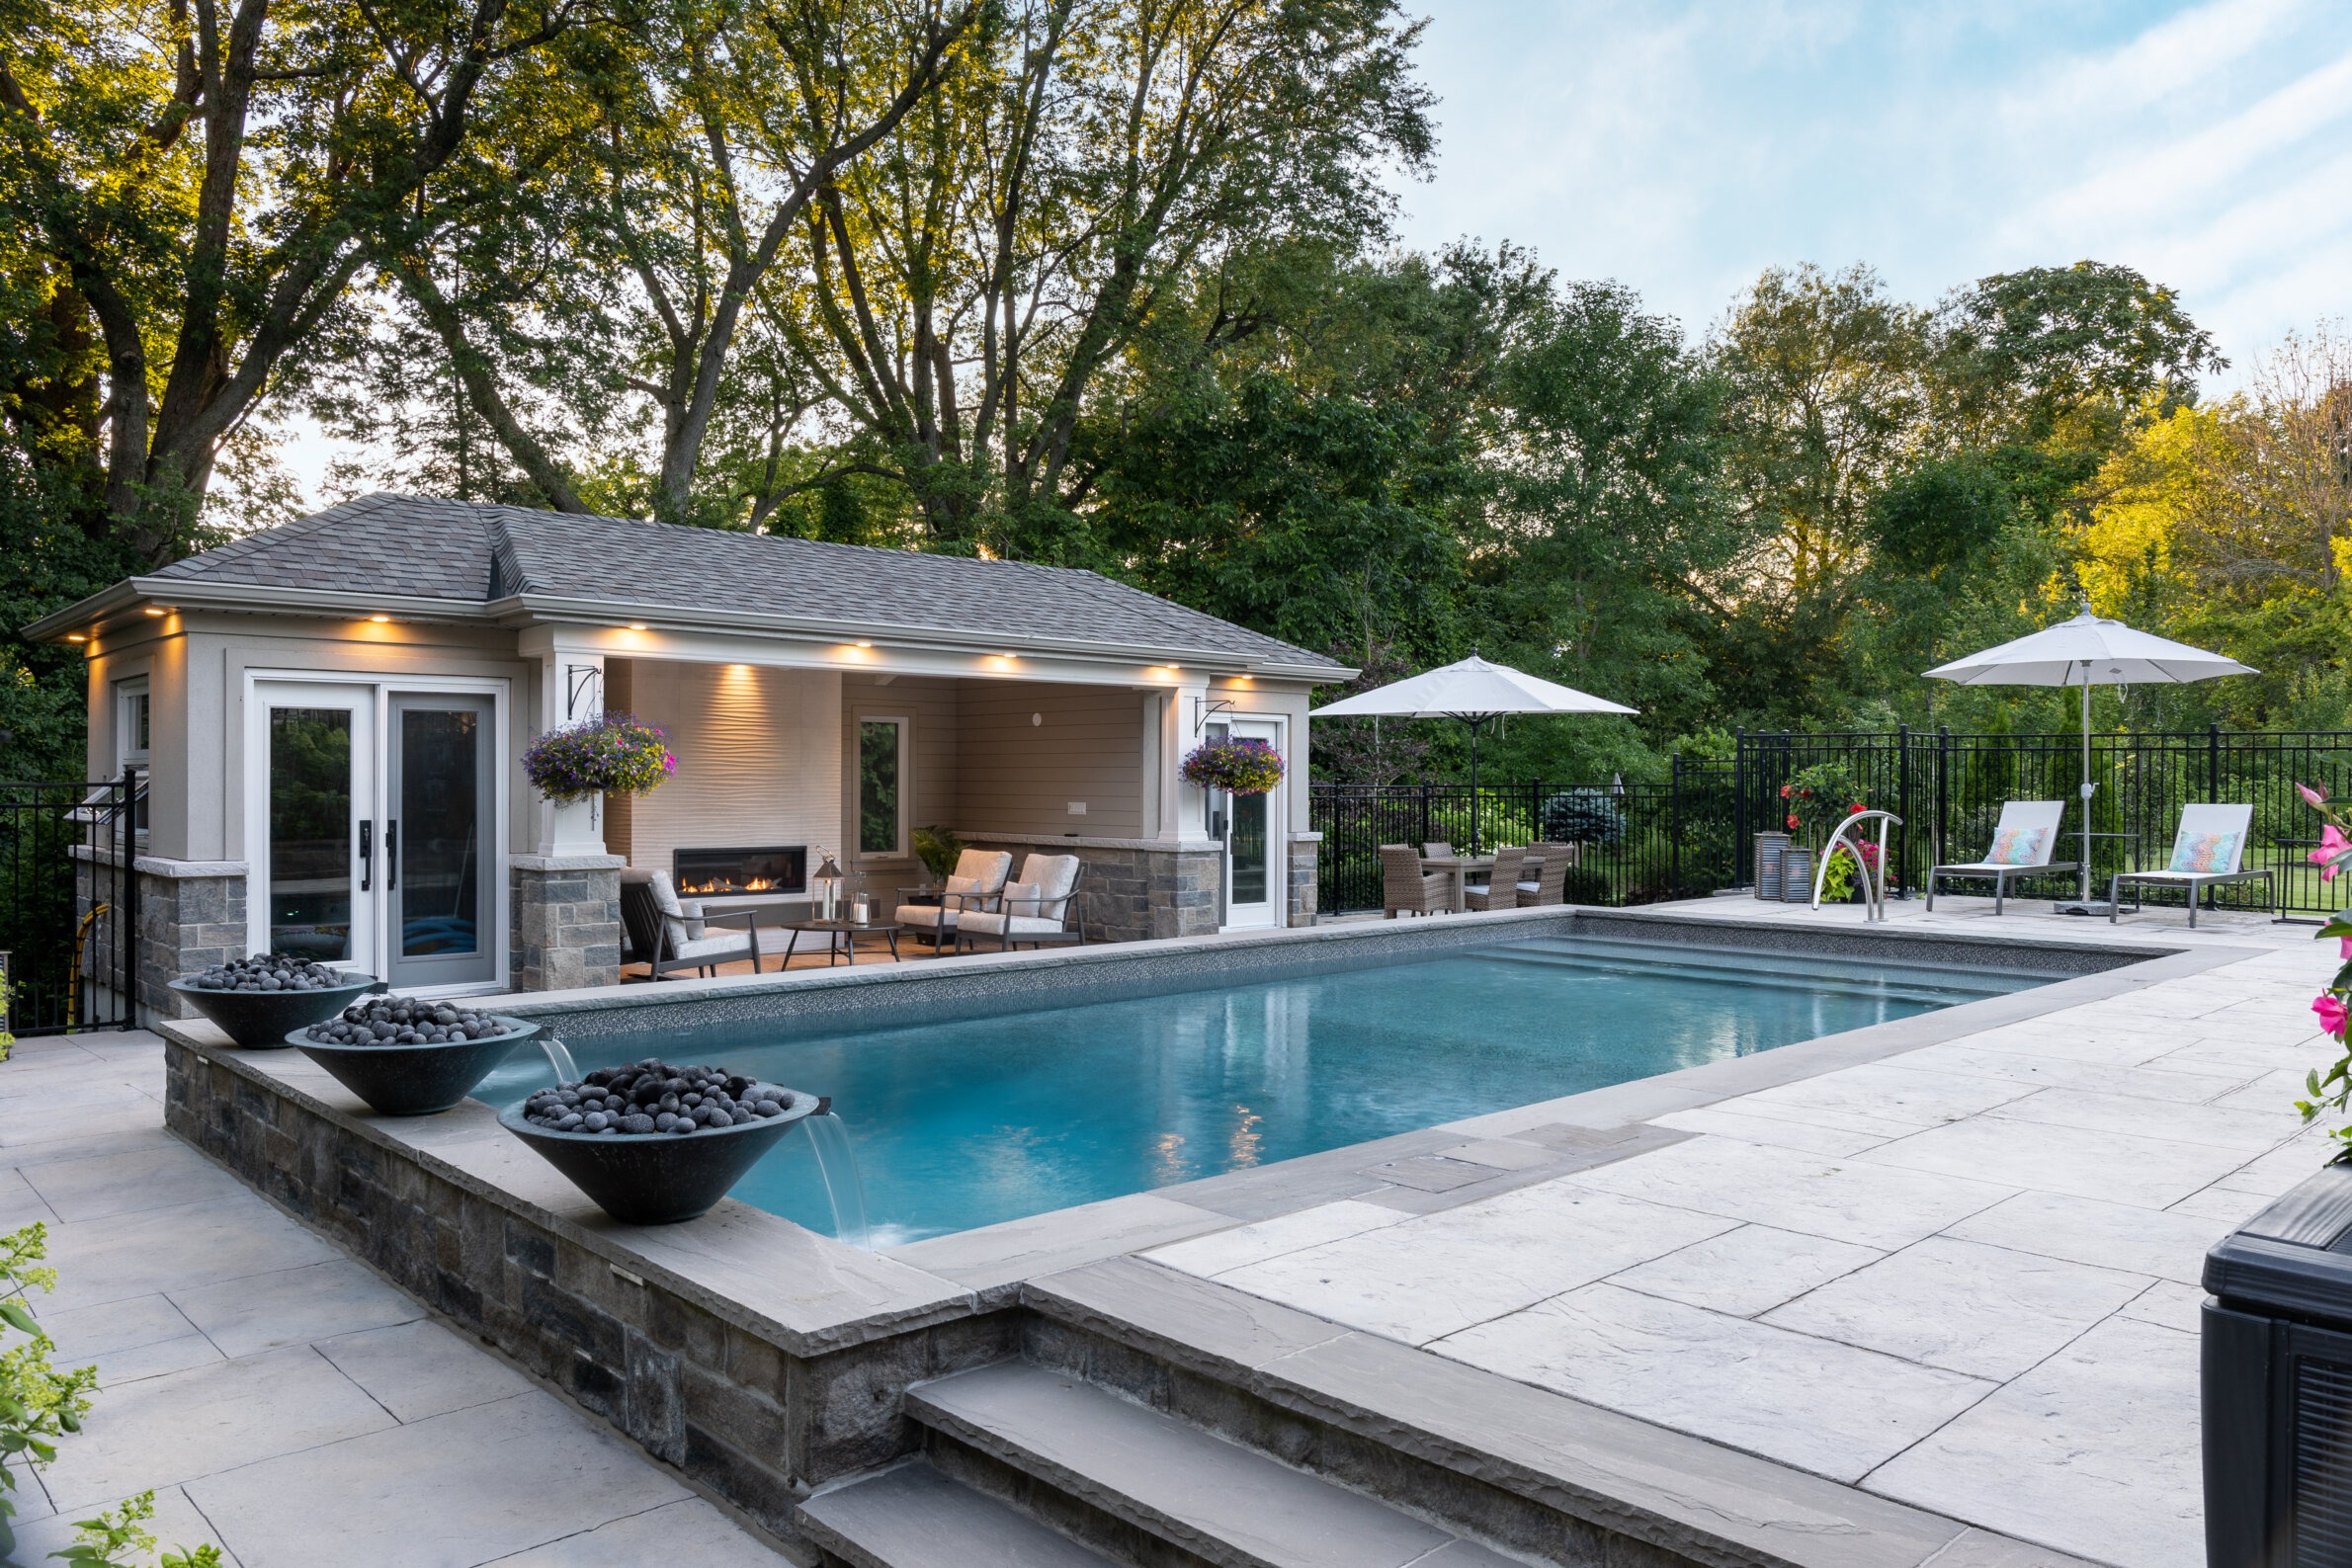 Luxurious backyard with a swimming pool, patio area, sun loungers, umbrellas, a pool house with a fireplace, trees for privacy, and decorative bowls on pedestals.